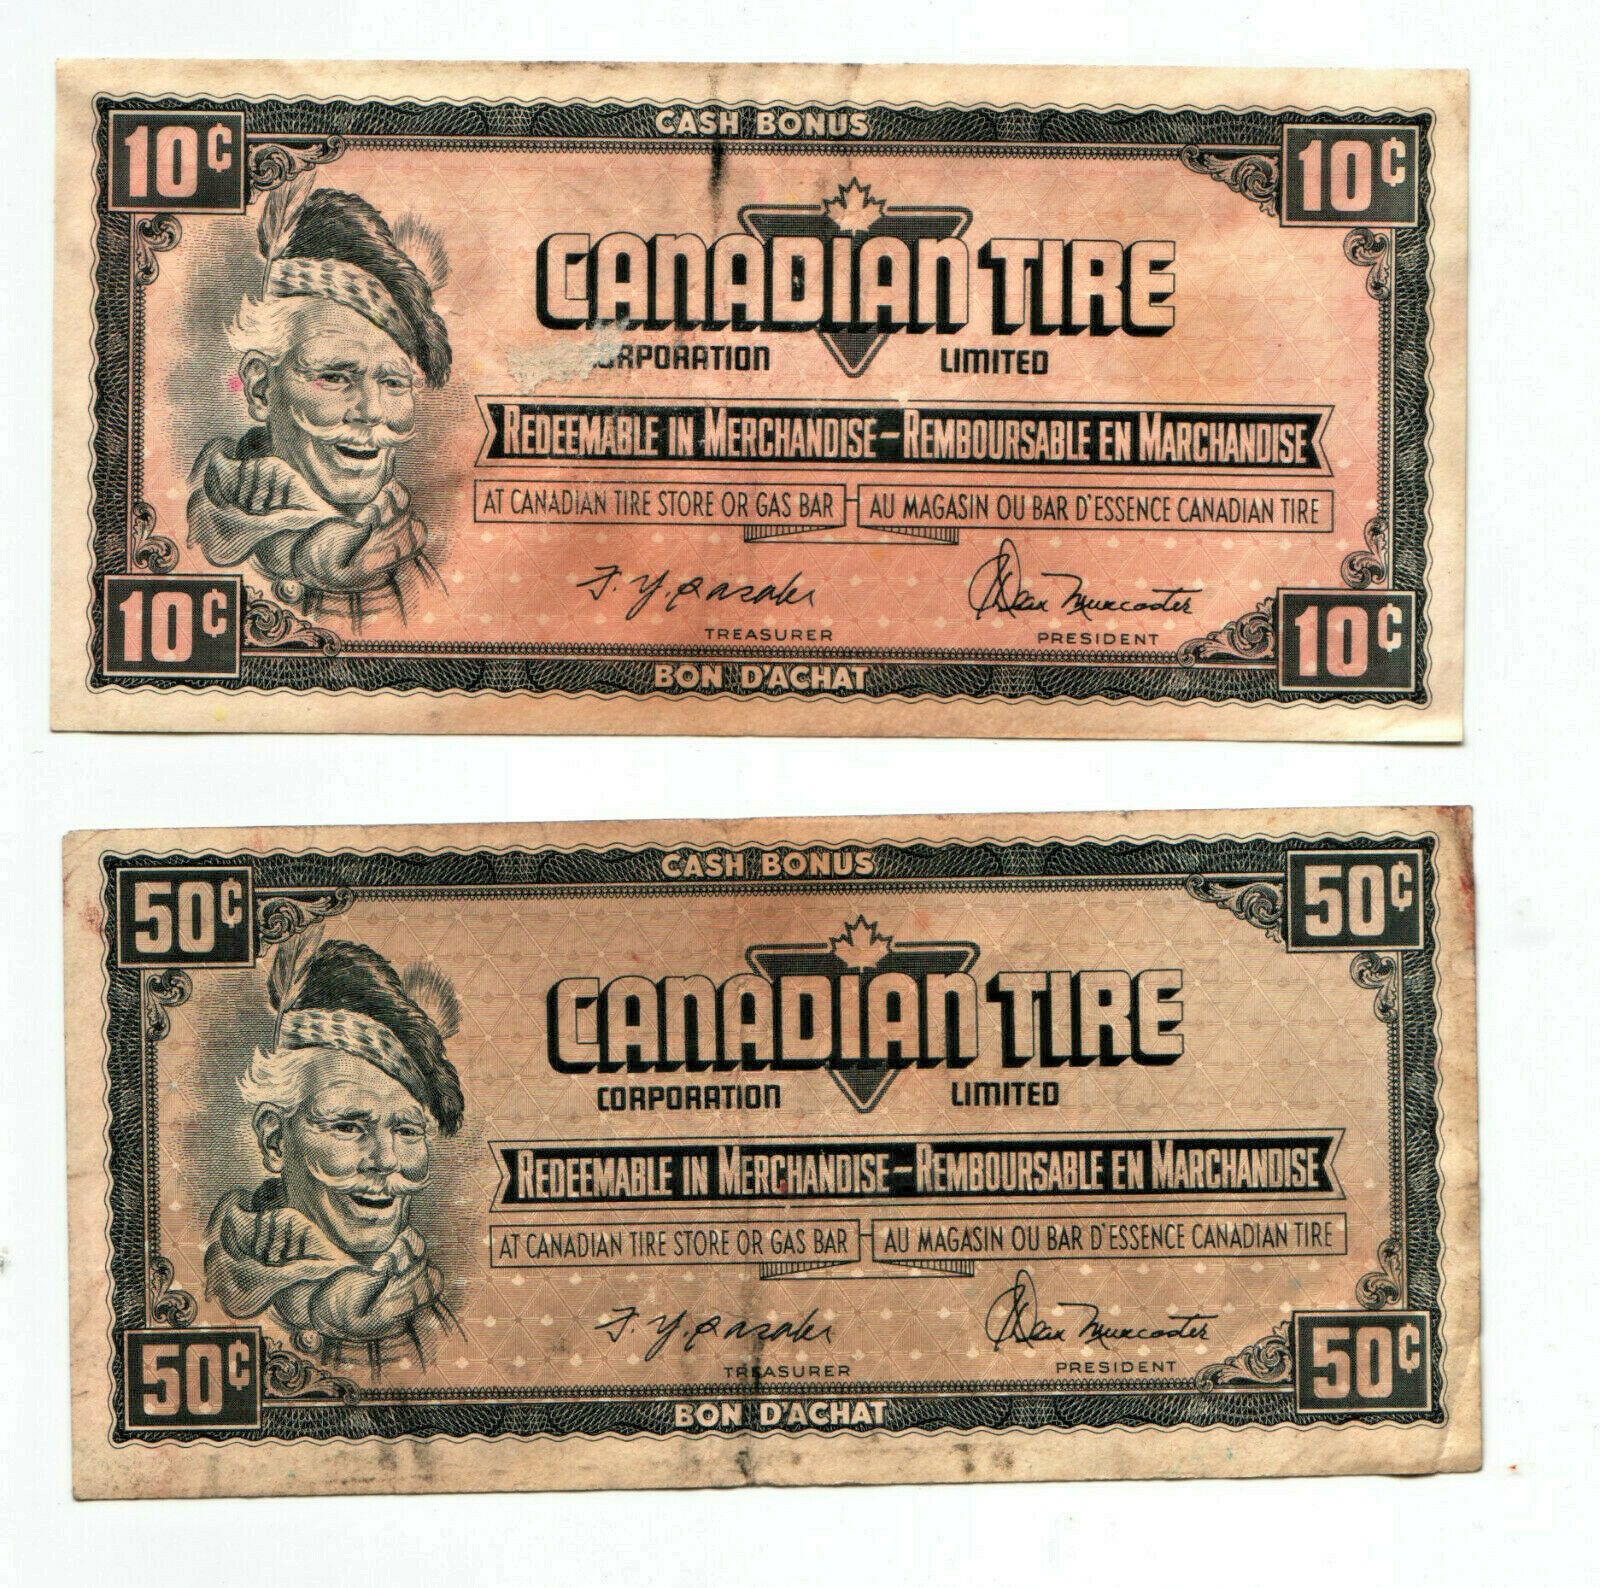 Canadian Tire 10 And 50 Cent Cash Bonus Redeemable In Merchandise